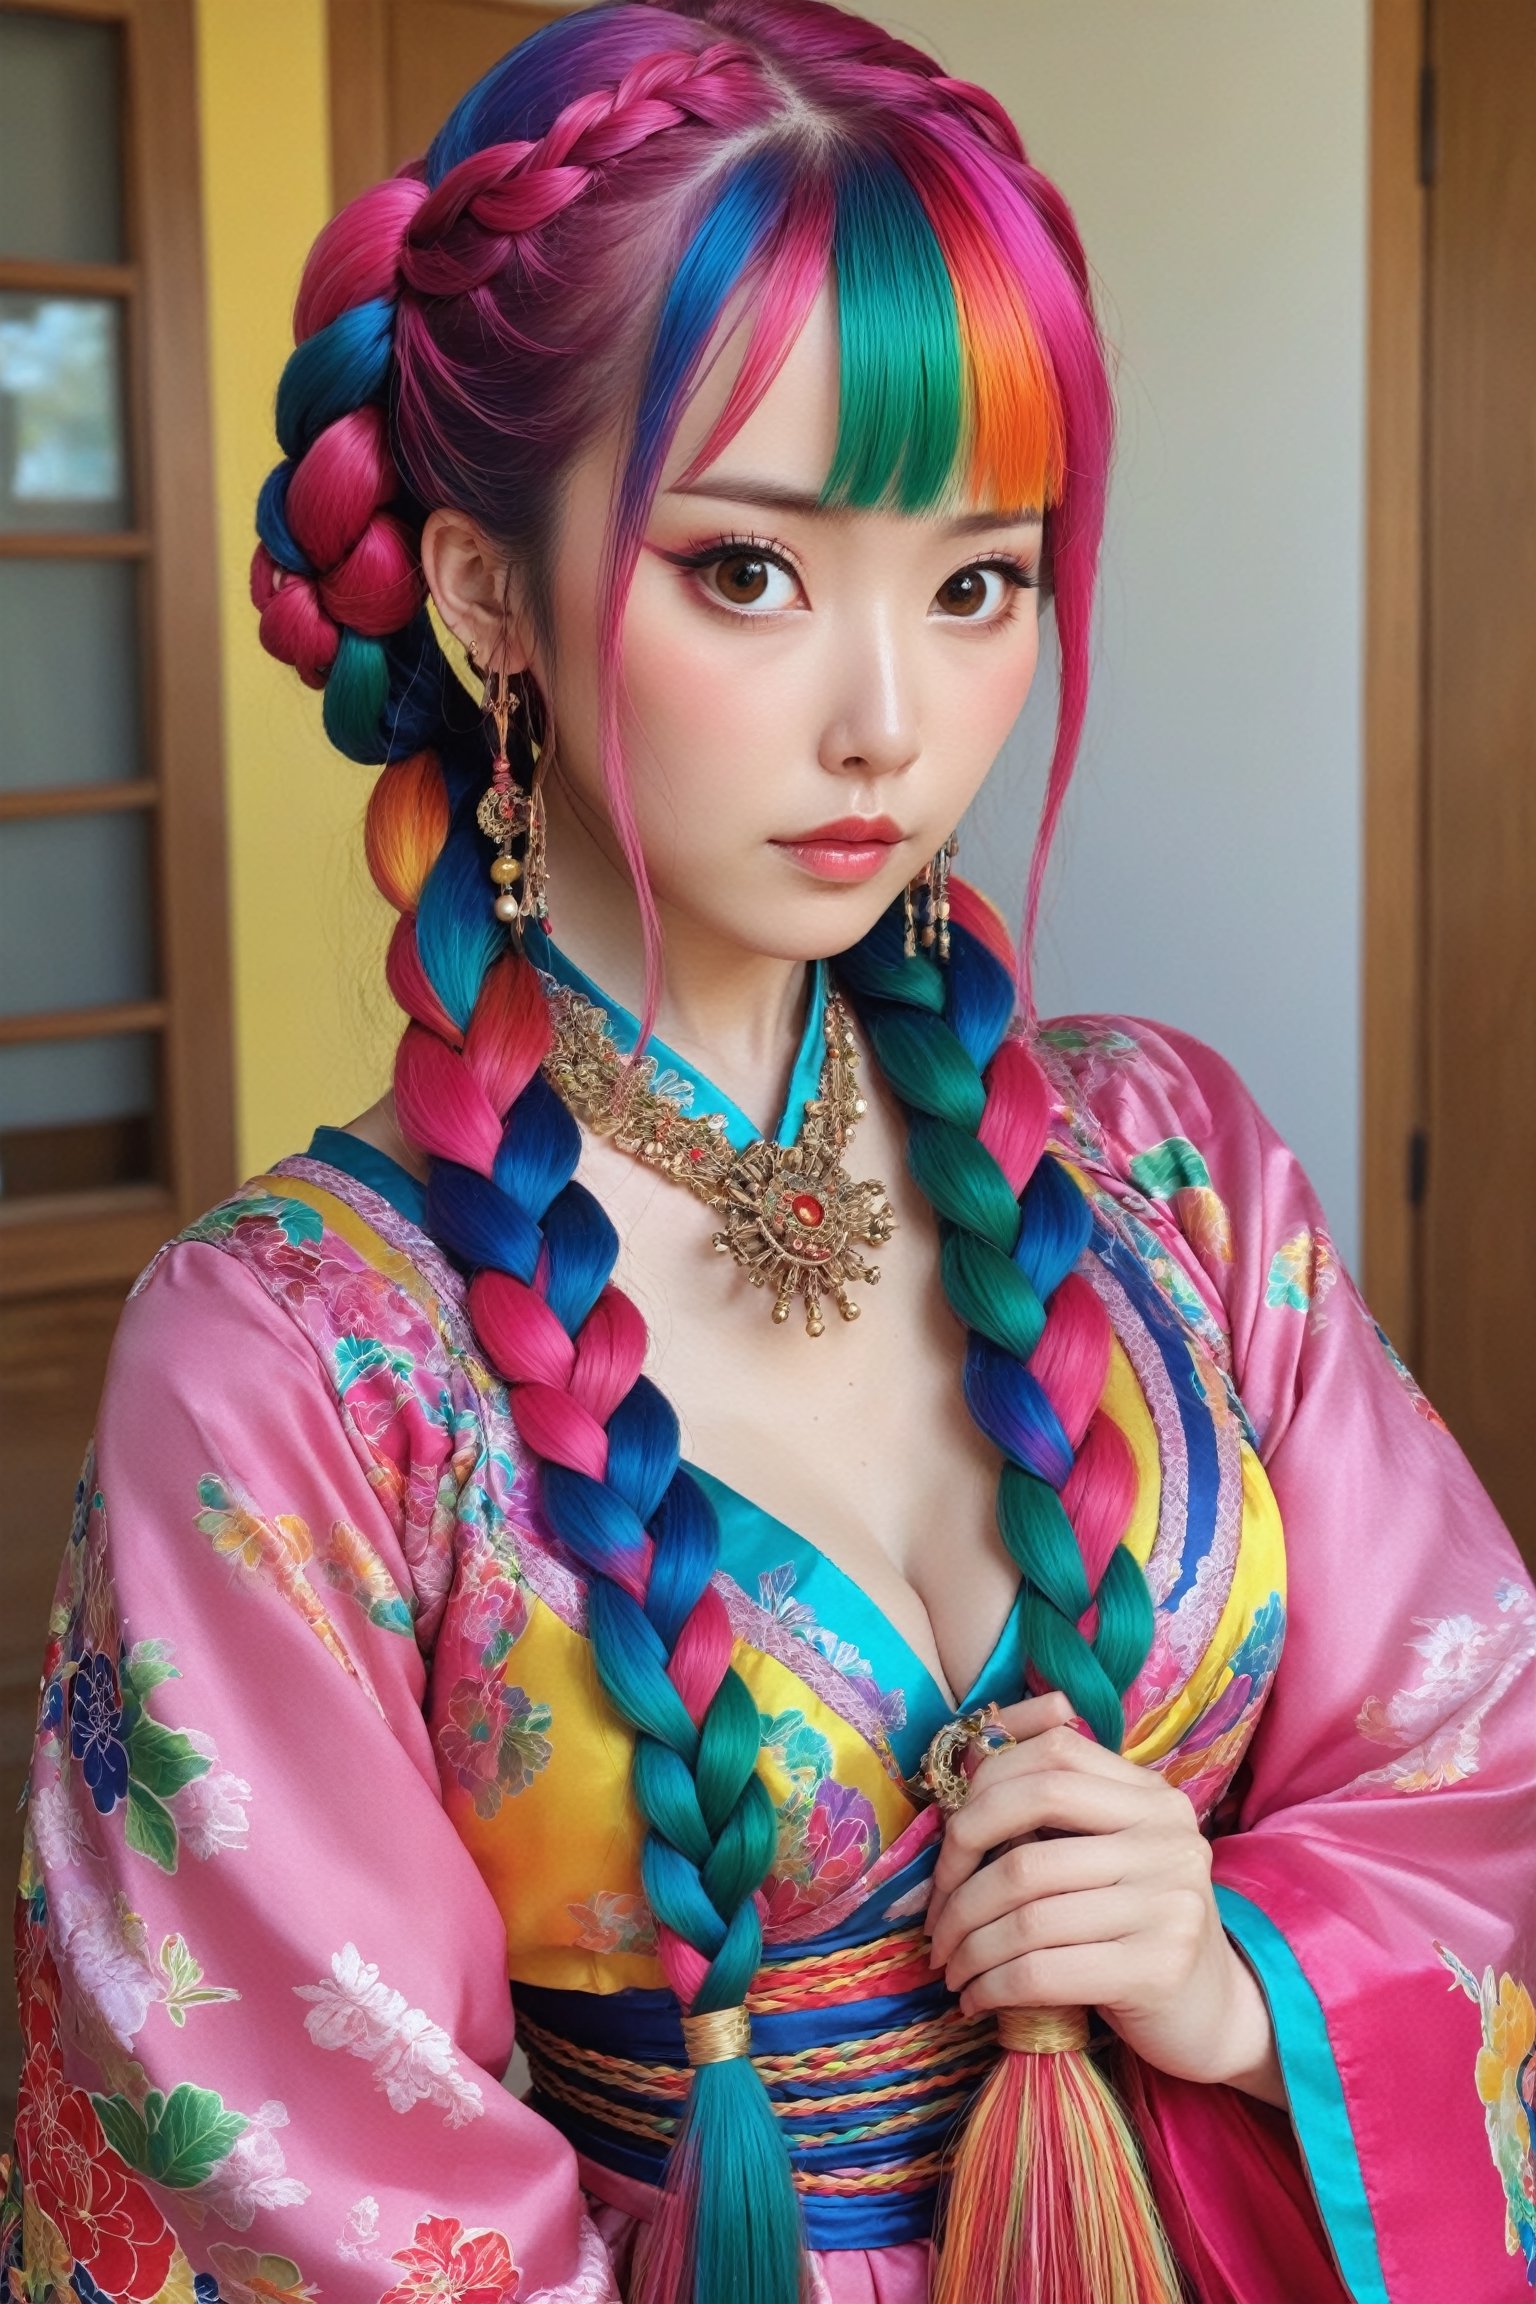 Kitsch maximalism fashion style,1Girl,Beautiful japanese woman, long incredibly intricately braided hair, colorful and overdecorated japanese　dress,enakorin,Rainbow haired girl ,pink-emo